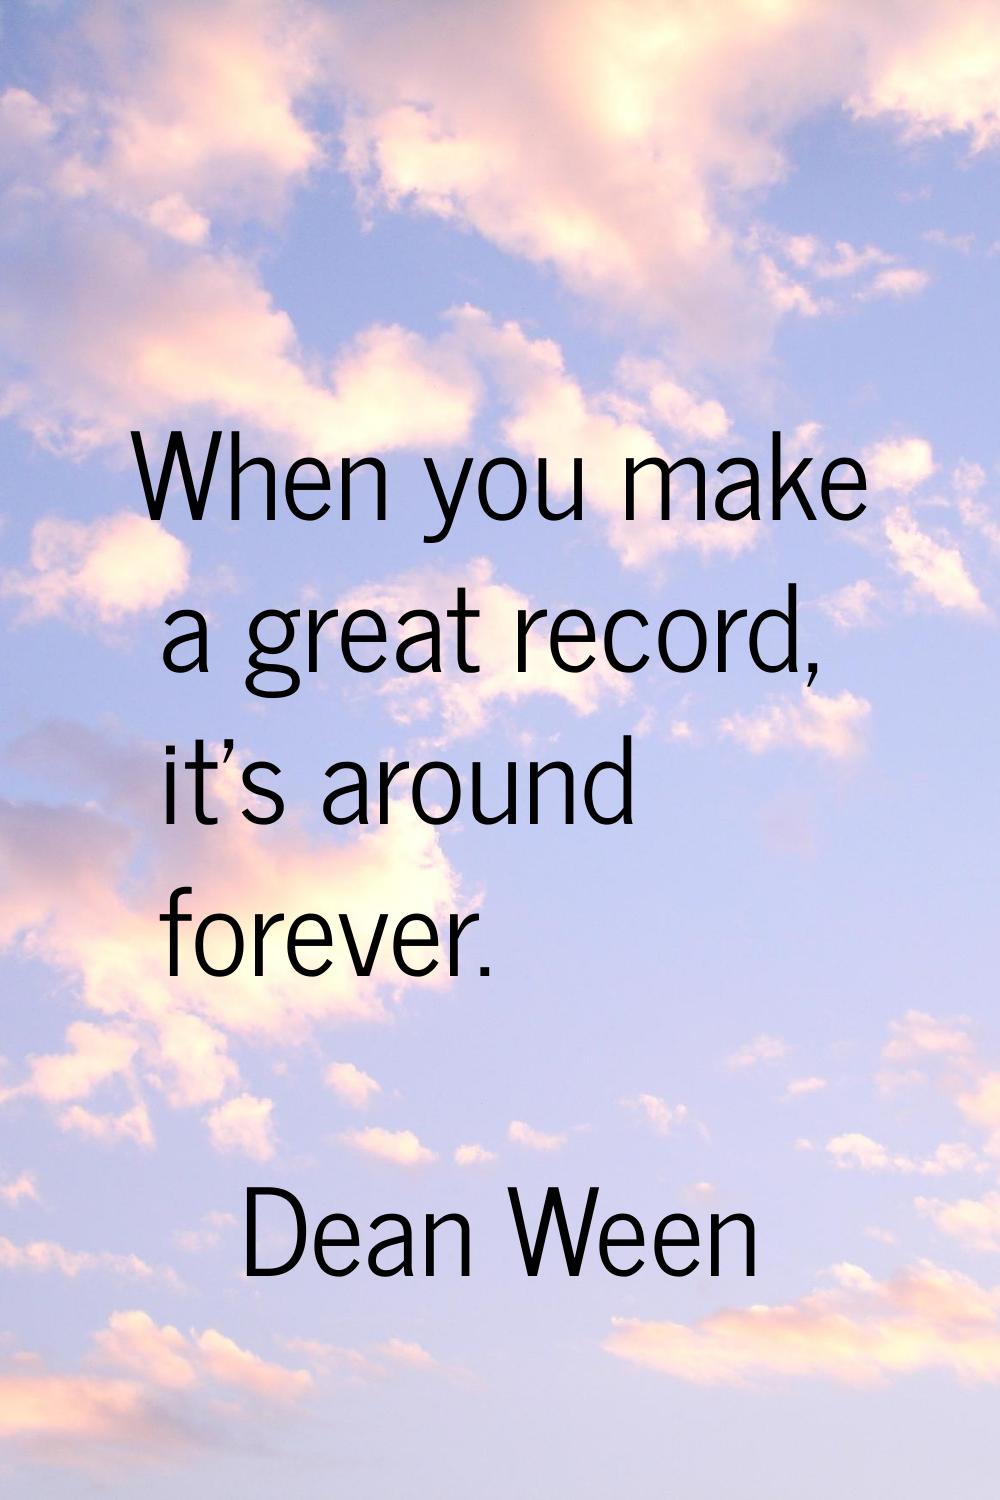 When you make a great record, it's around forever.